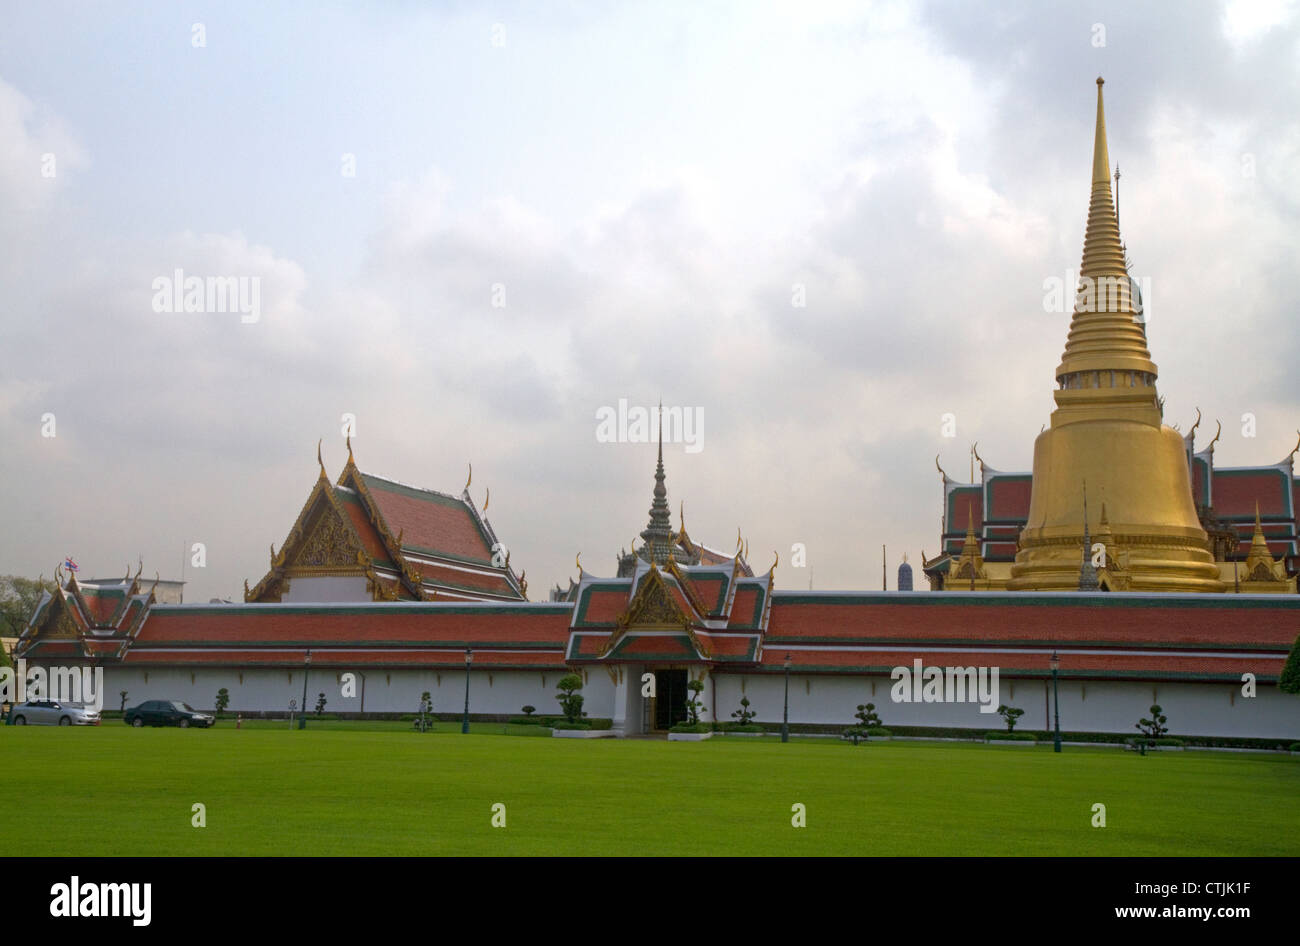 The Temple of the Emerald Buddha located within the precincts of the Grand Palace, Bangkok, Thailand. Stock Photo